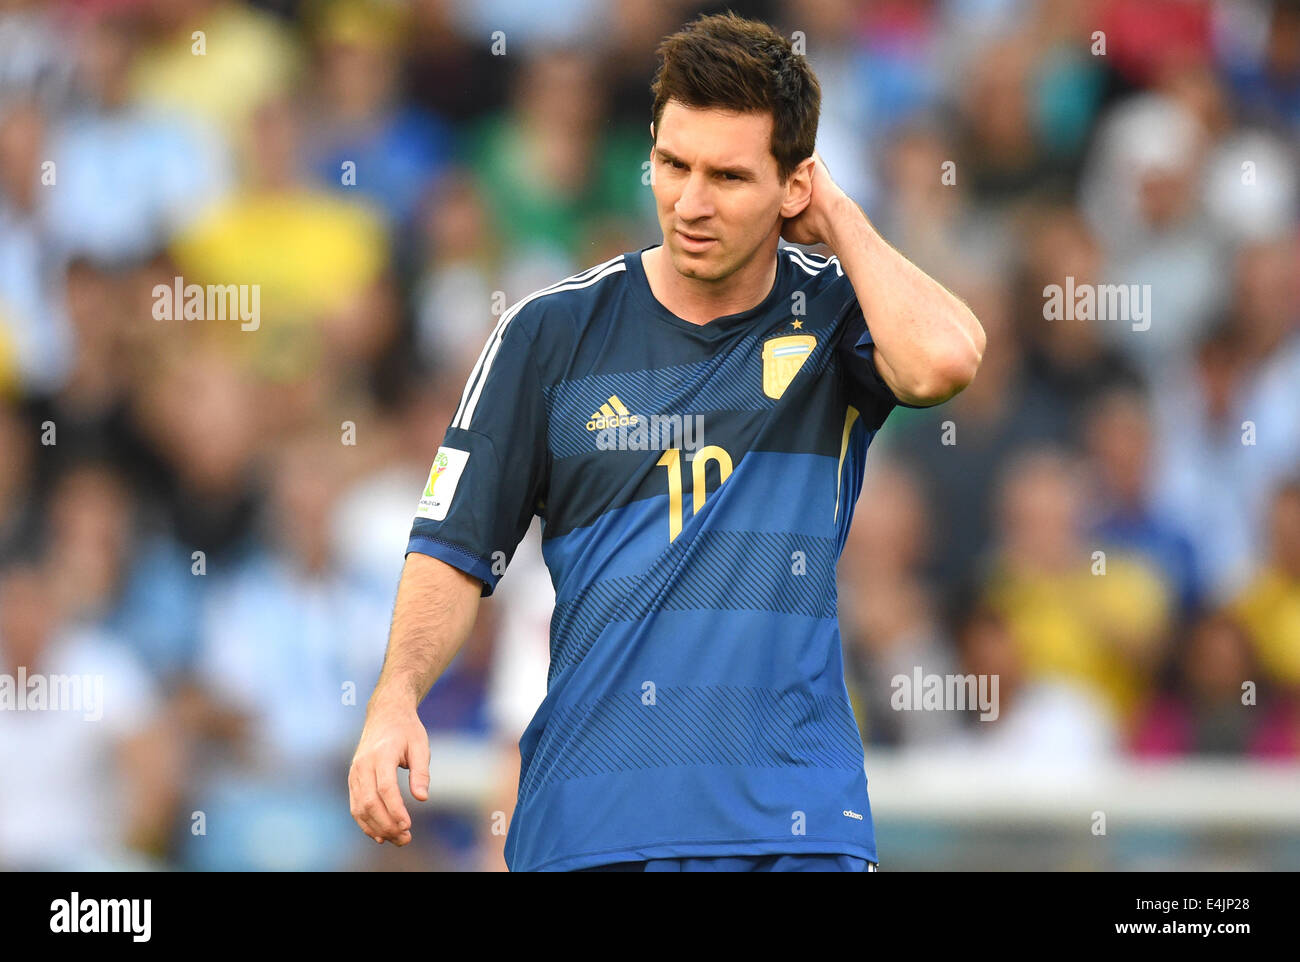 Rio de Janeiro, Brazil. 13th July, 2014. Lionel Messi of Argentina reacts during the FIFA World Cup 2014 final soccer match between Germany and Argentina at the Estadio do Maracana in Rio de Janeiro, Brazil, 13 July 2014. Photo: Marcus Brandt/dpa/Alamy Live News Stock Photo